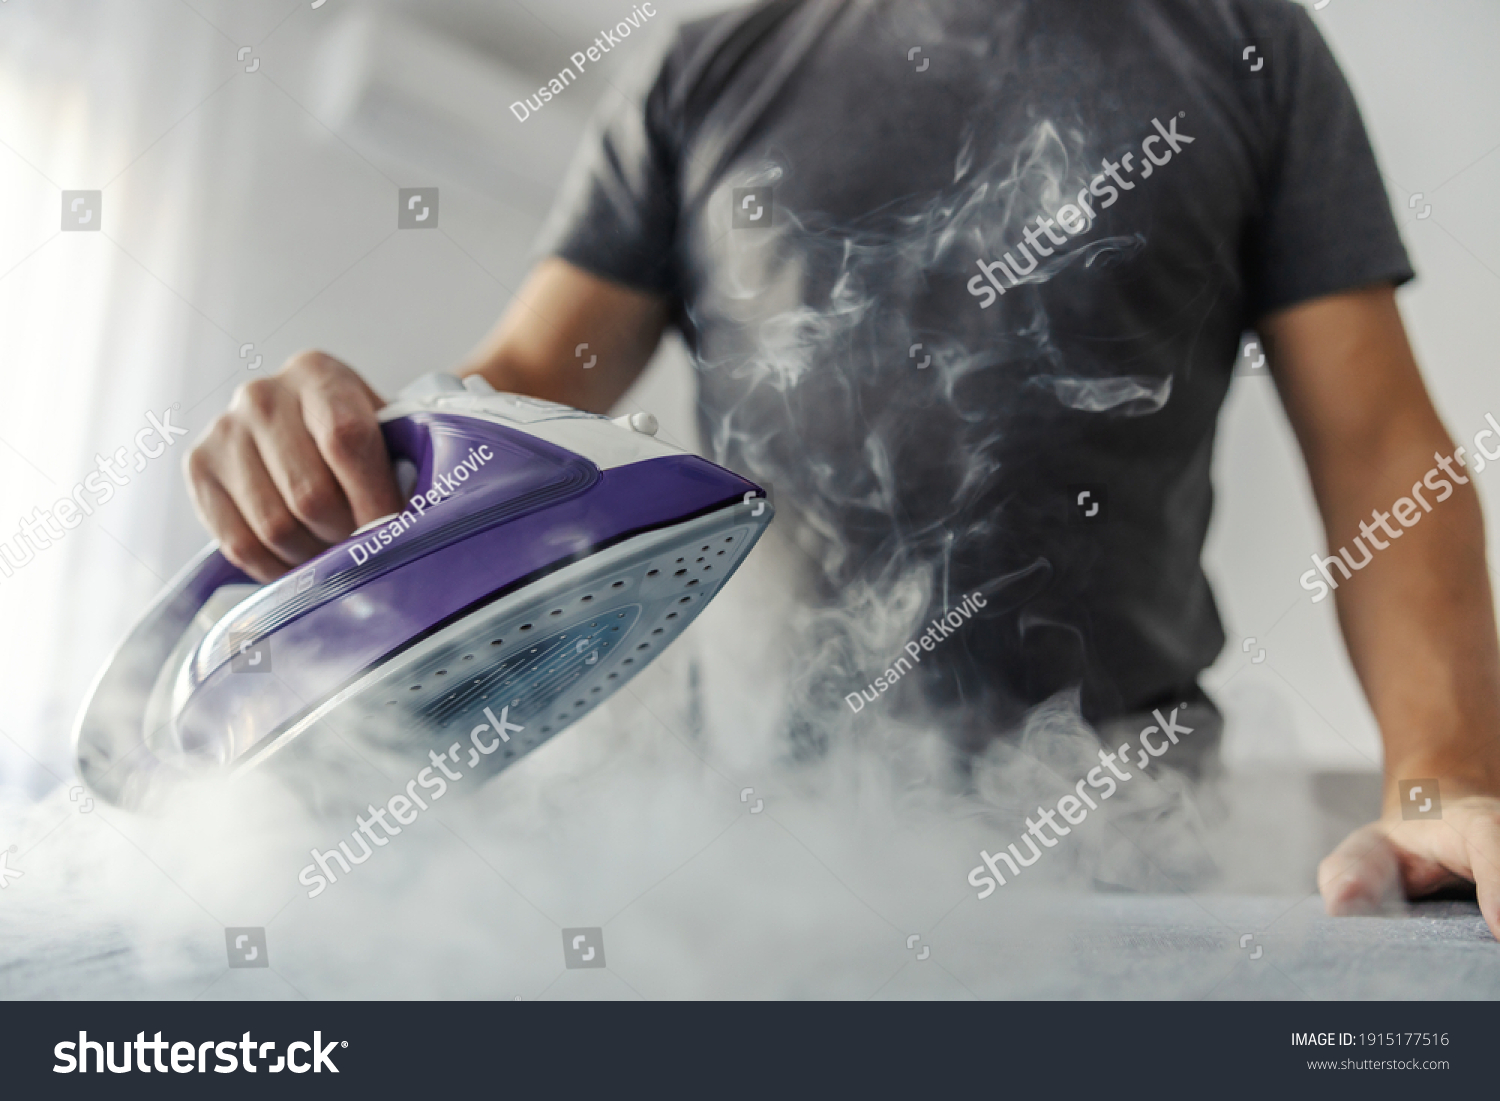 The hot steam from the iron. Powerful film effect of steam on photography. A close-up of a man's body in a grey t-shirt ironing clothes on an ironing board #1915177516